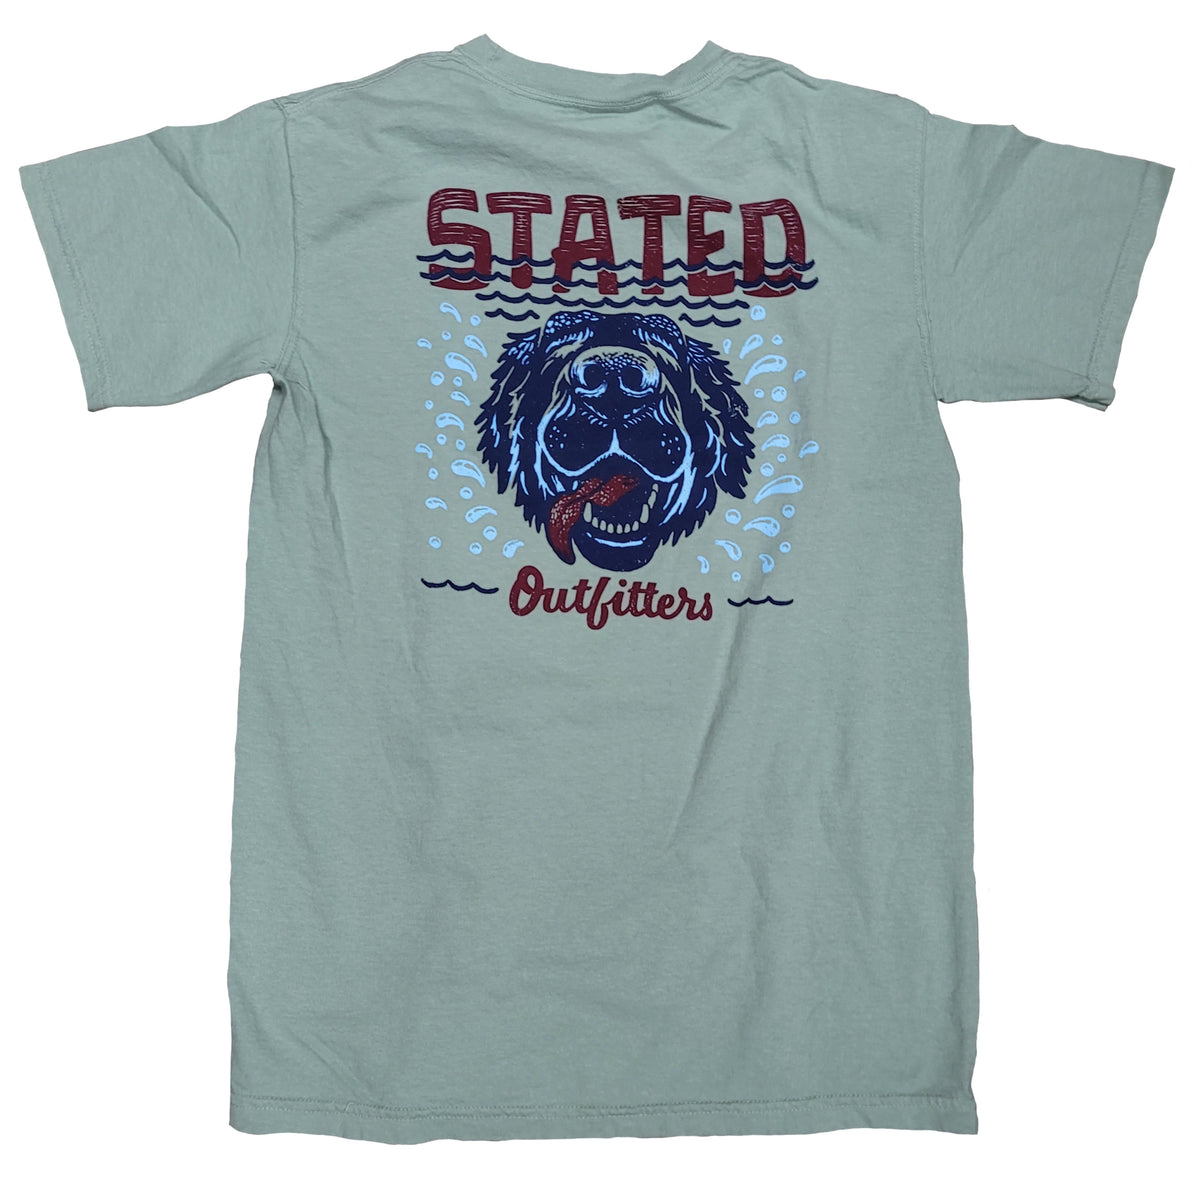 Stated Outfitters Wet Dog Tee